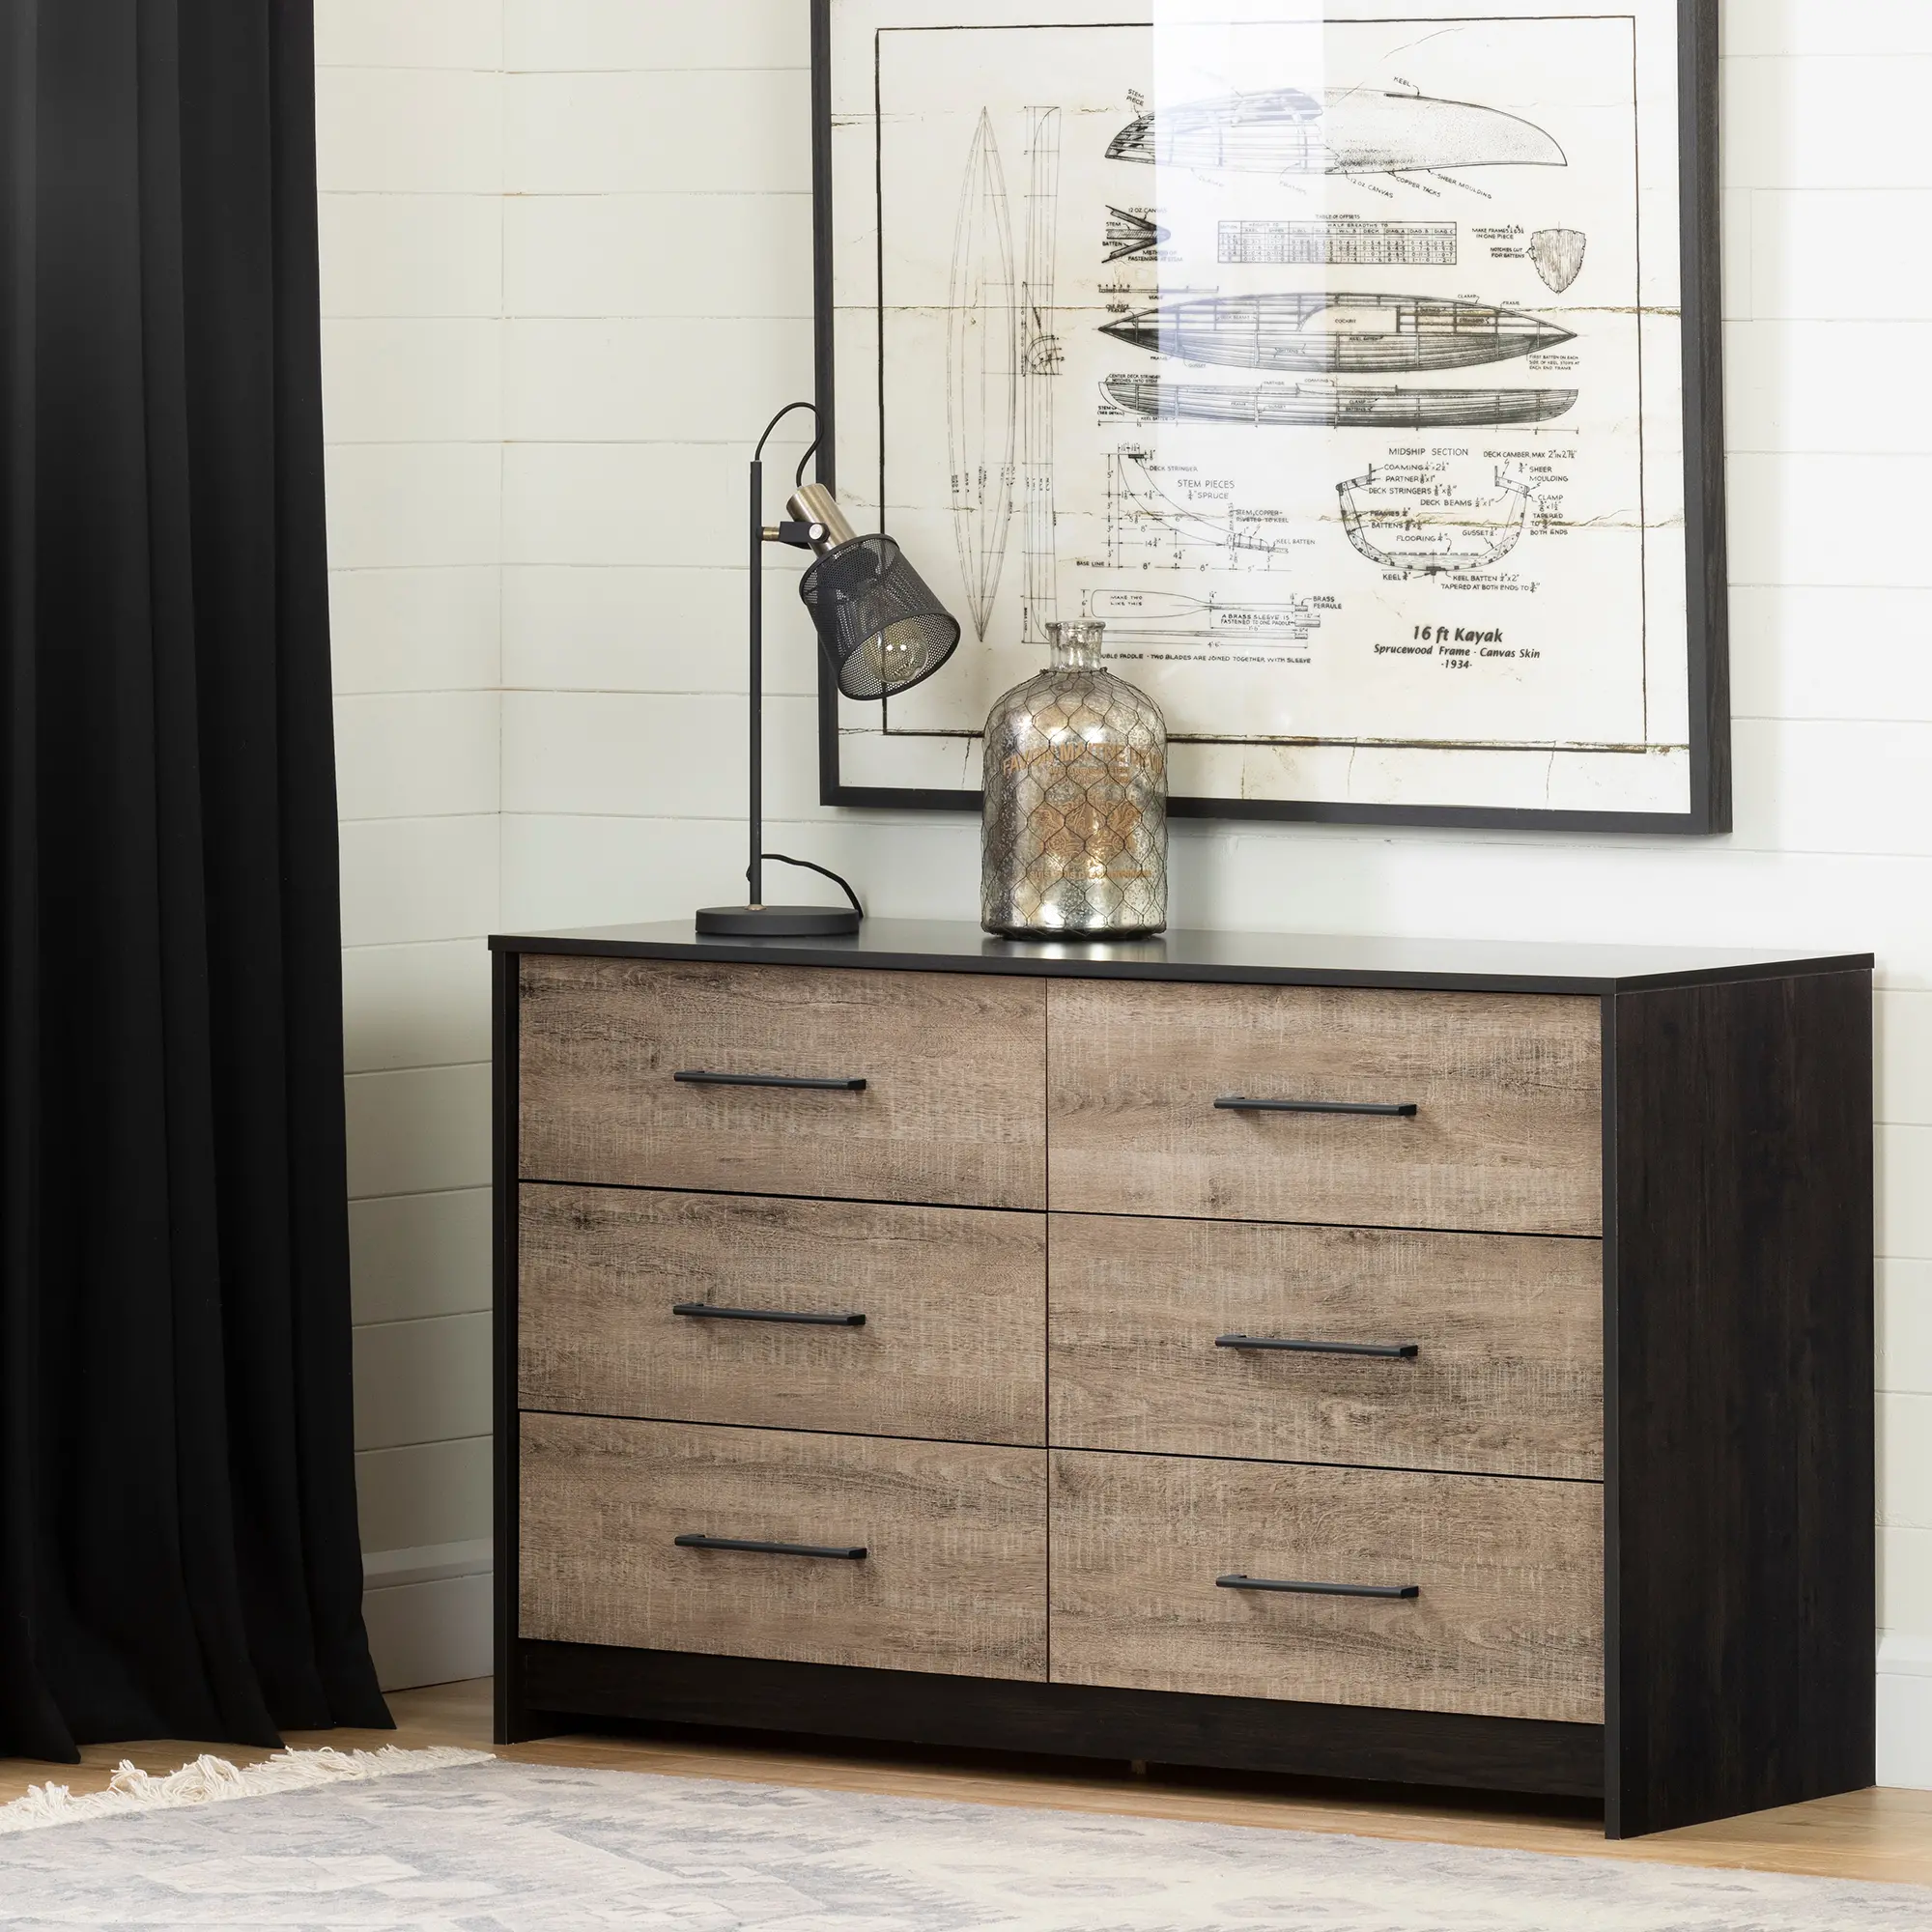 Photos - Dresser / Chests of Drawers South Shore Contemporary Weathered Oak and Brown 6 Drawer Dresser - South